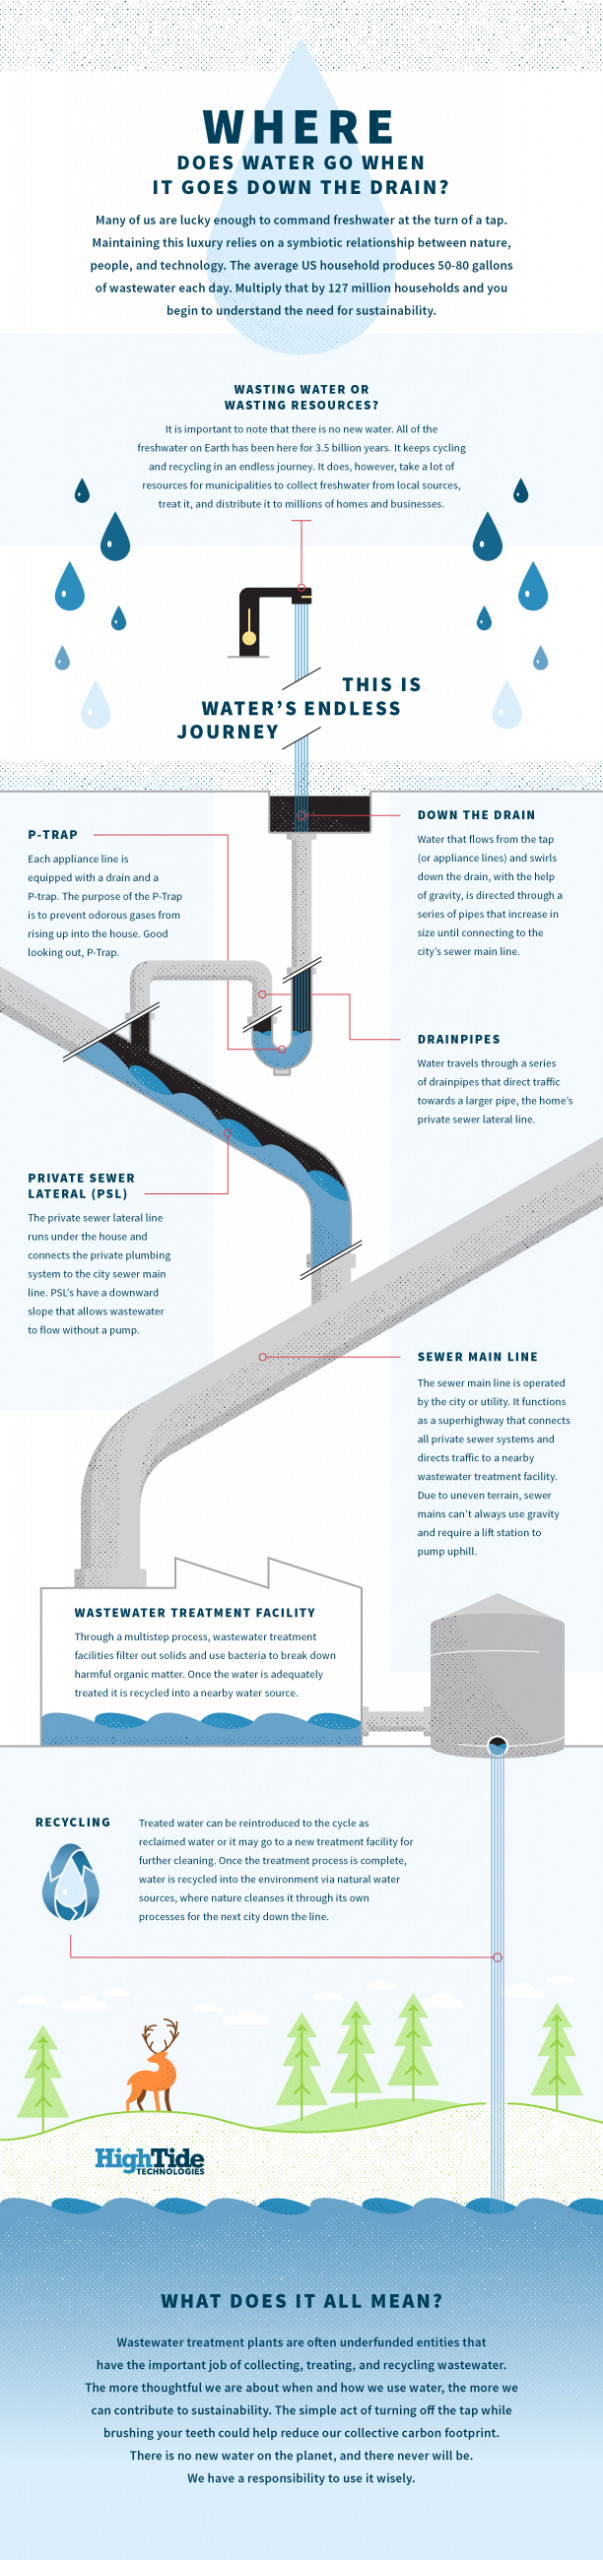 Where Does Water Go When It Goes Down the Drain? This infographic from High Tide Technologies shows just that.